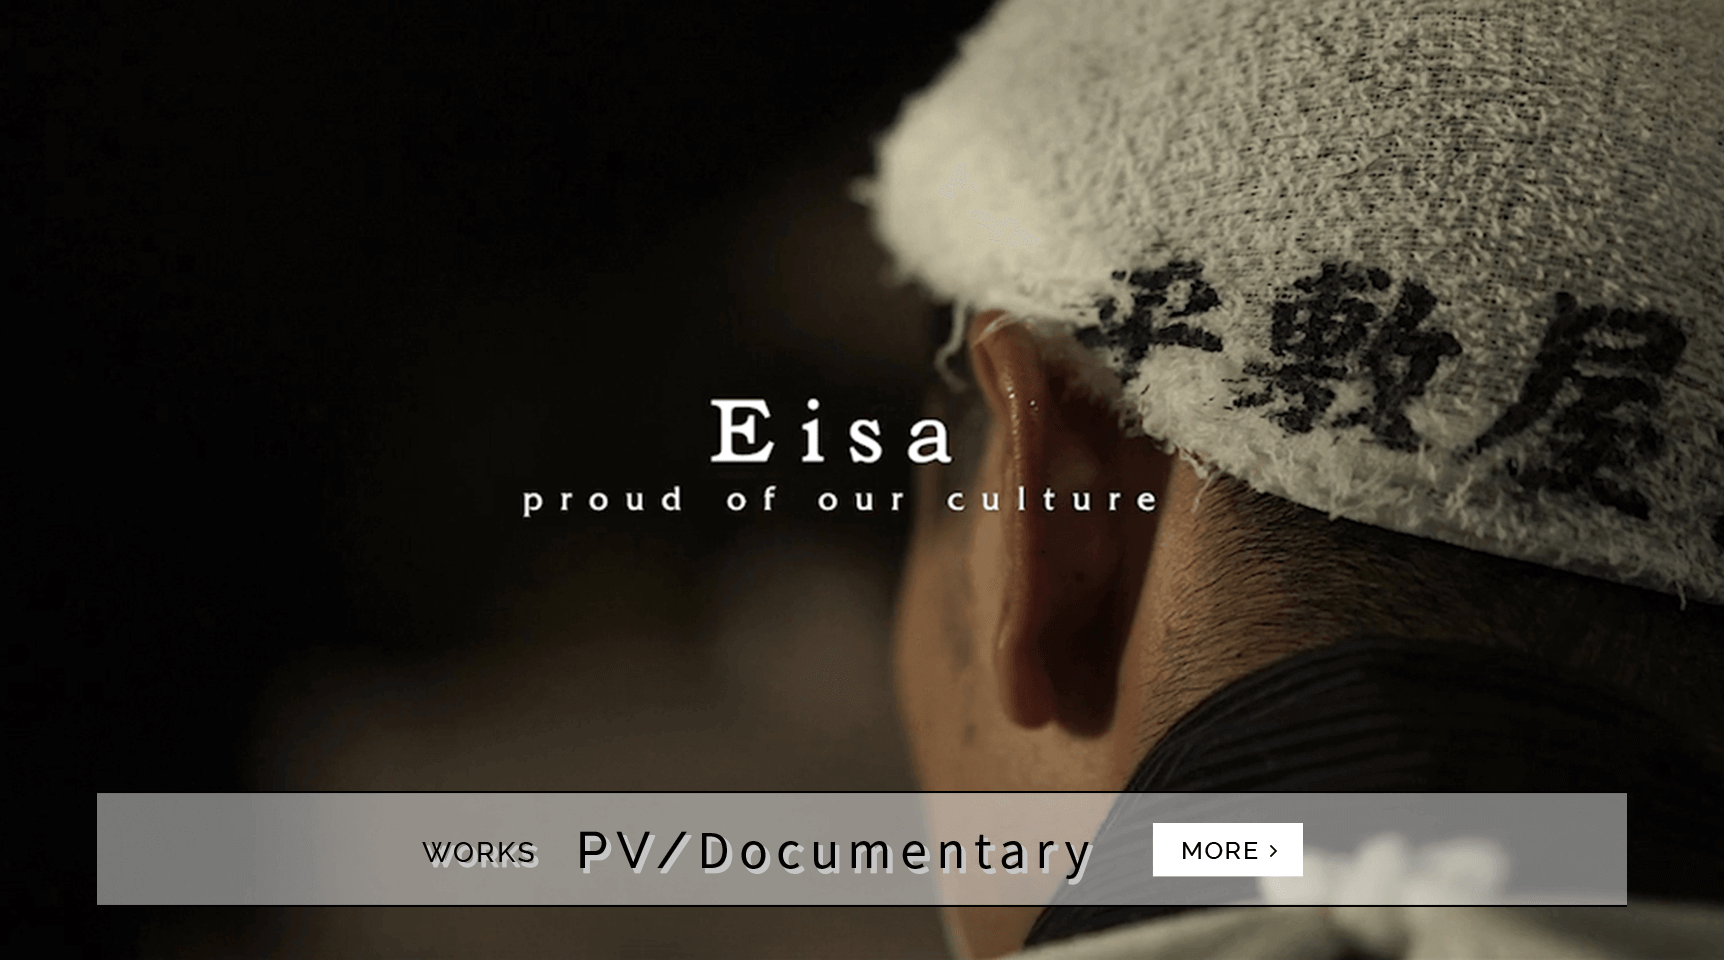 Eisa proud of our culture WORKS PV/Documentary more